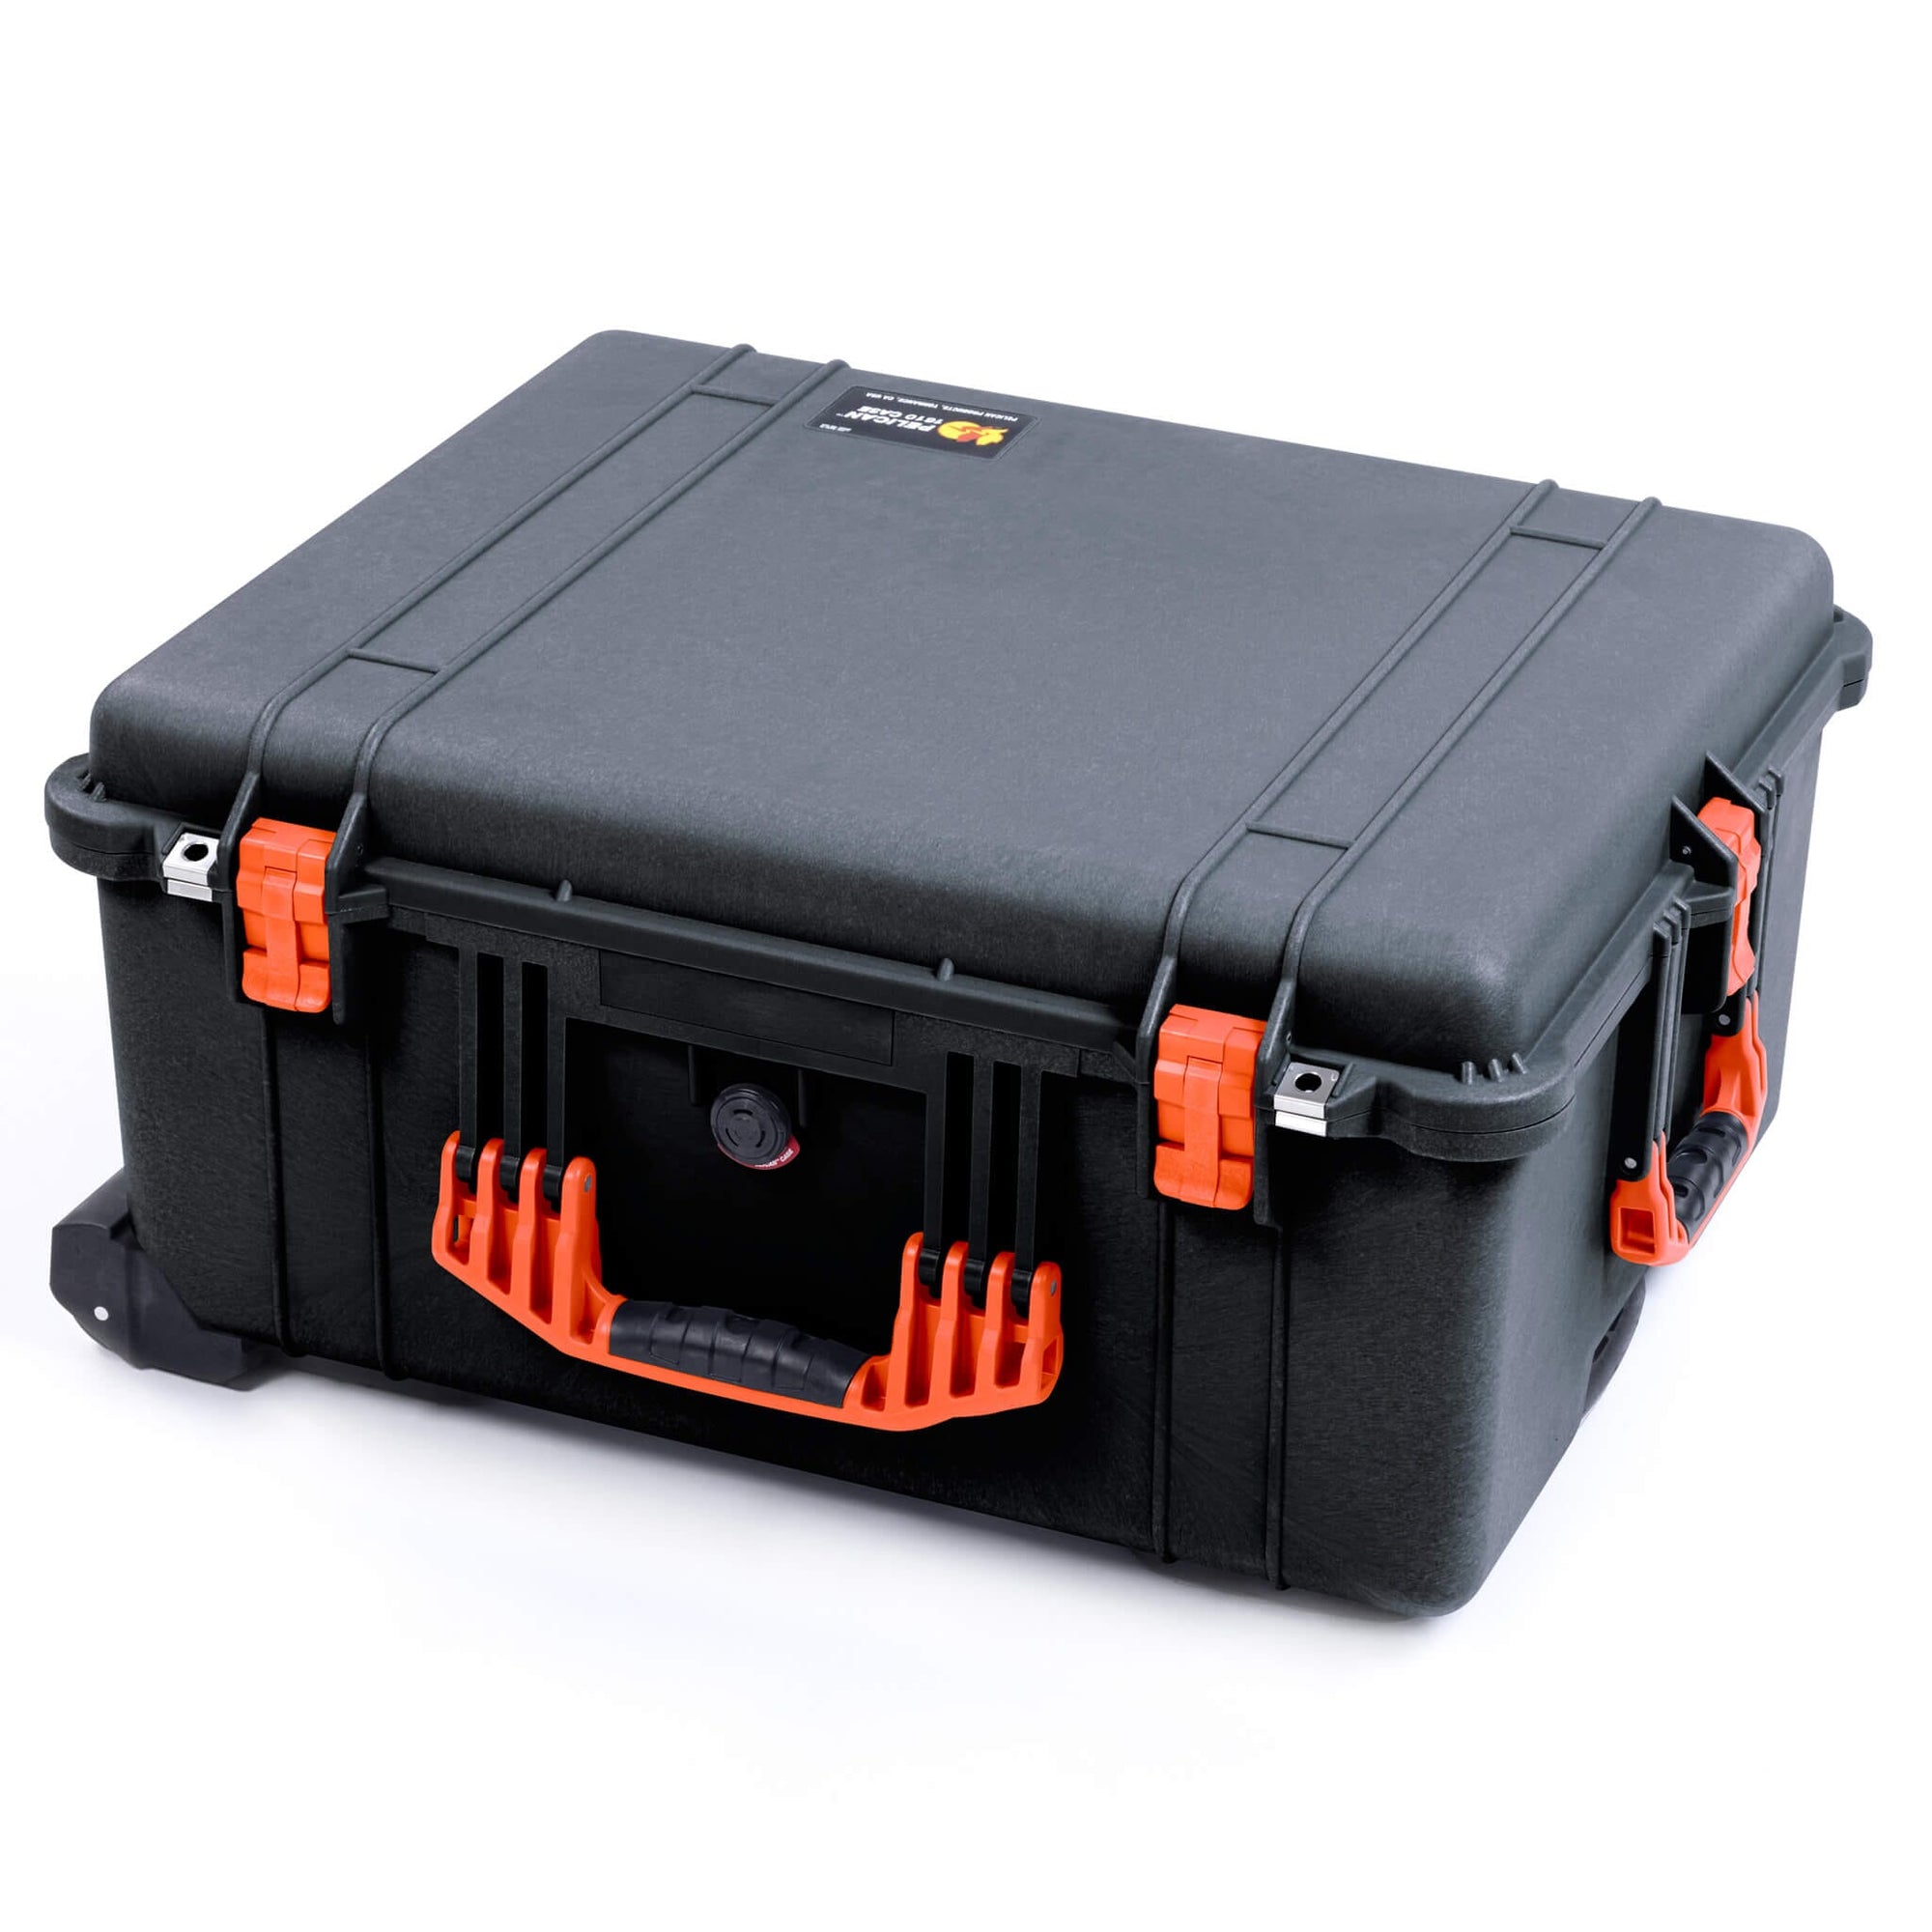 Pelican 1610 Case, Black with Orange Handles and Latches ColorCase 